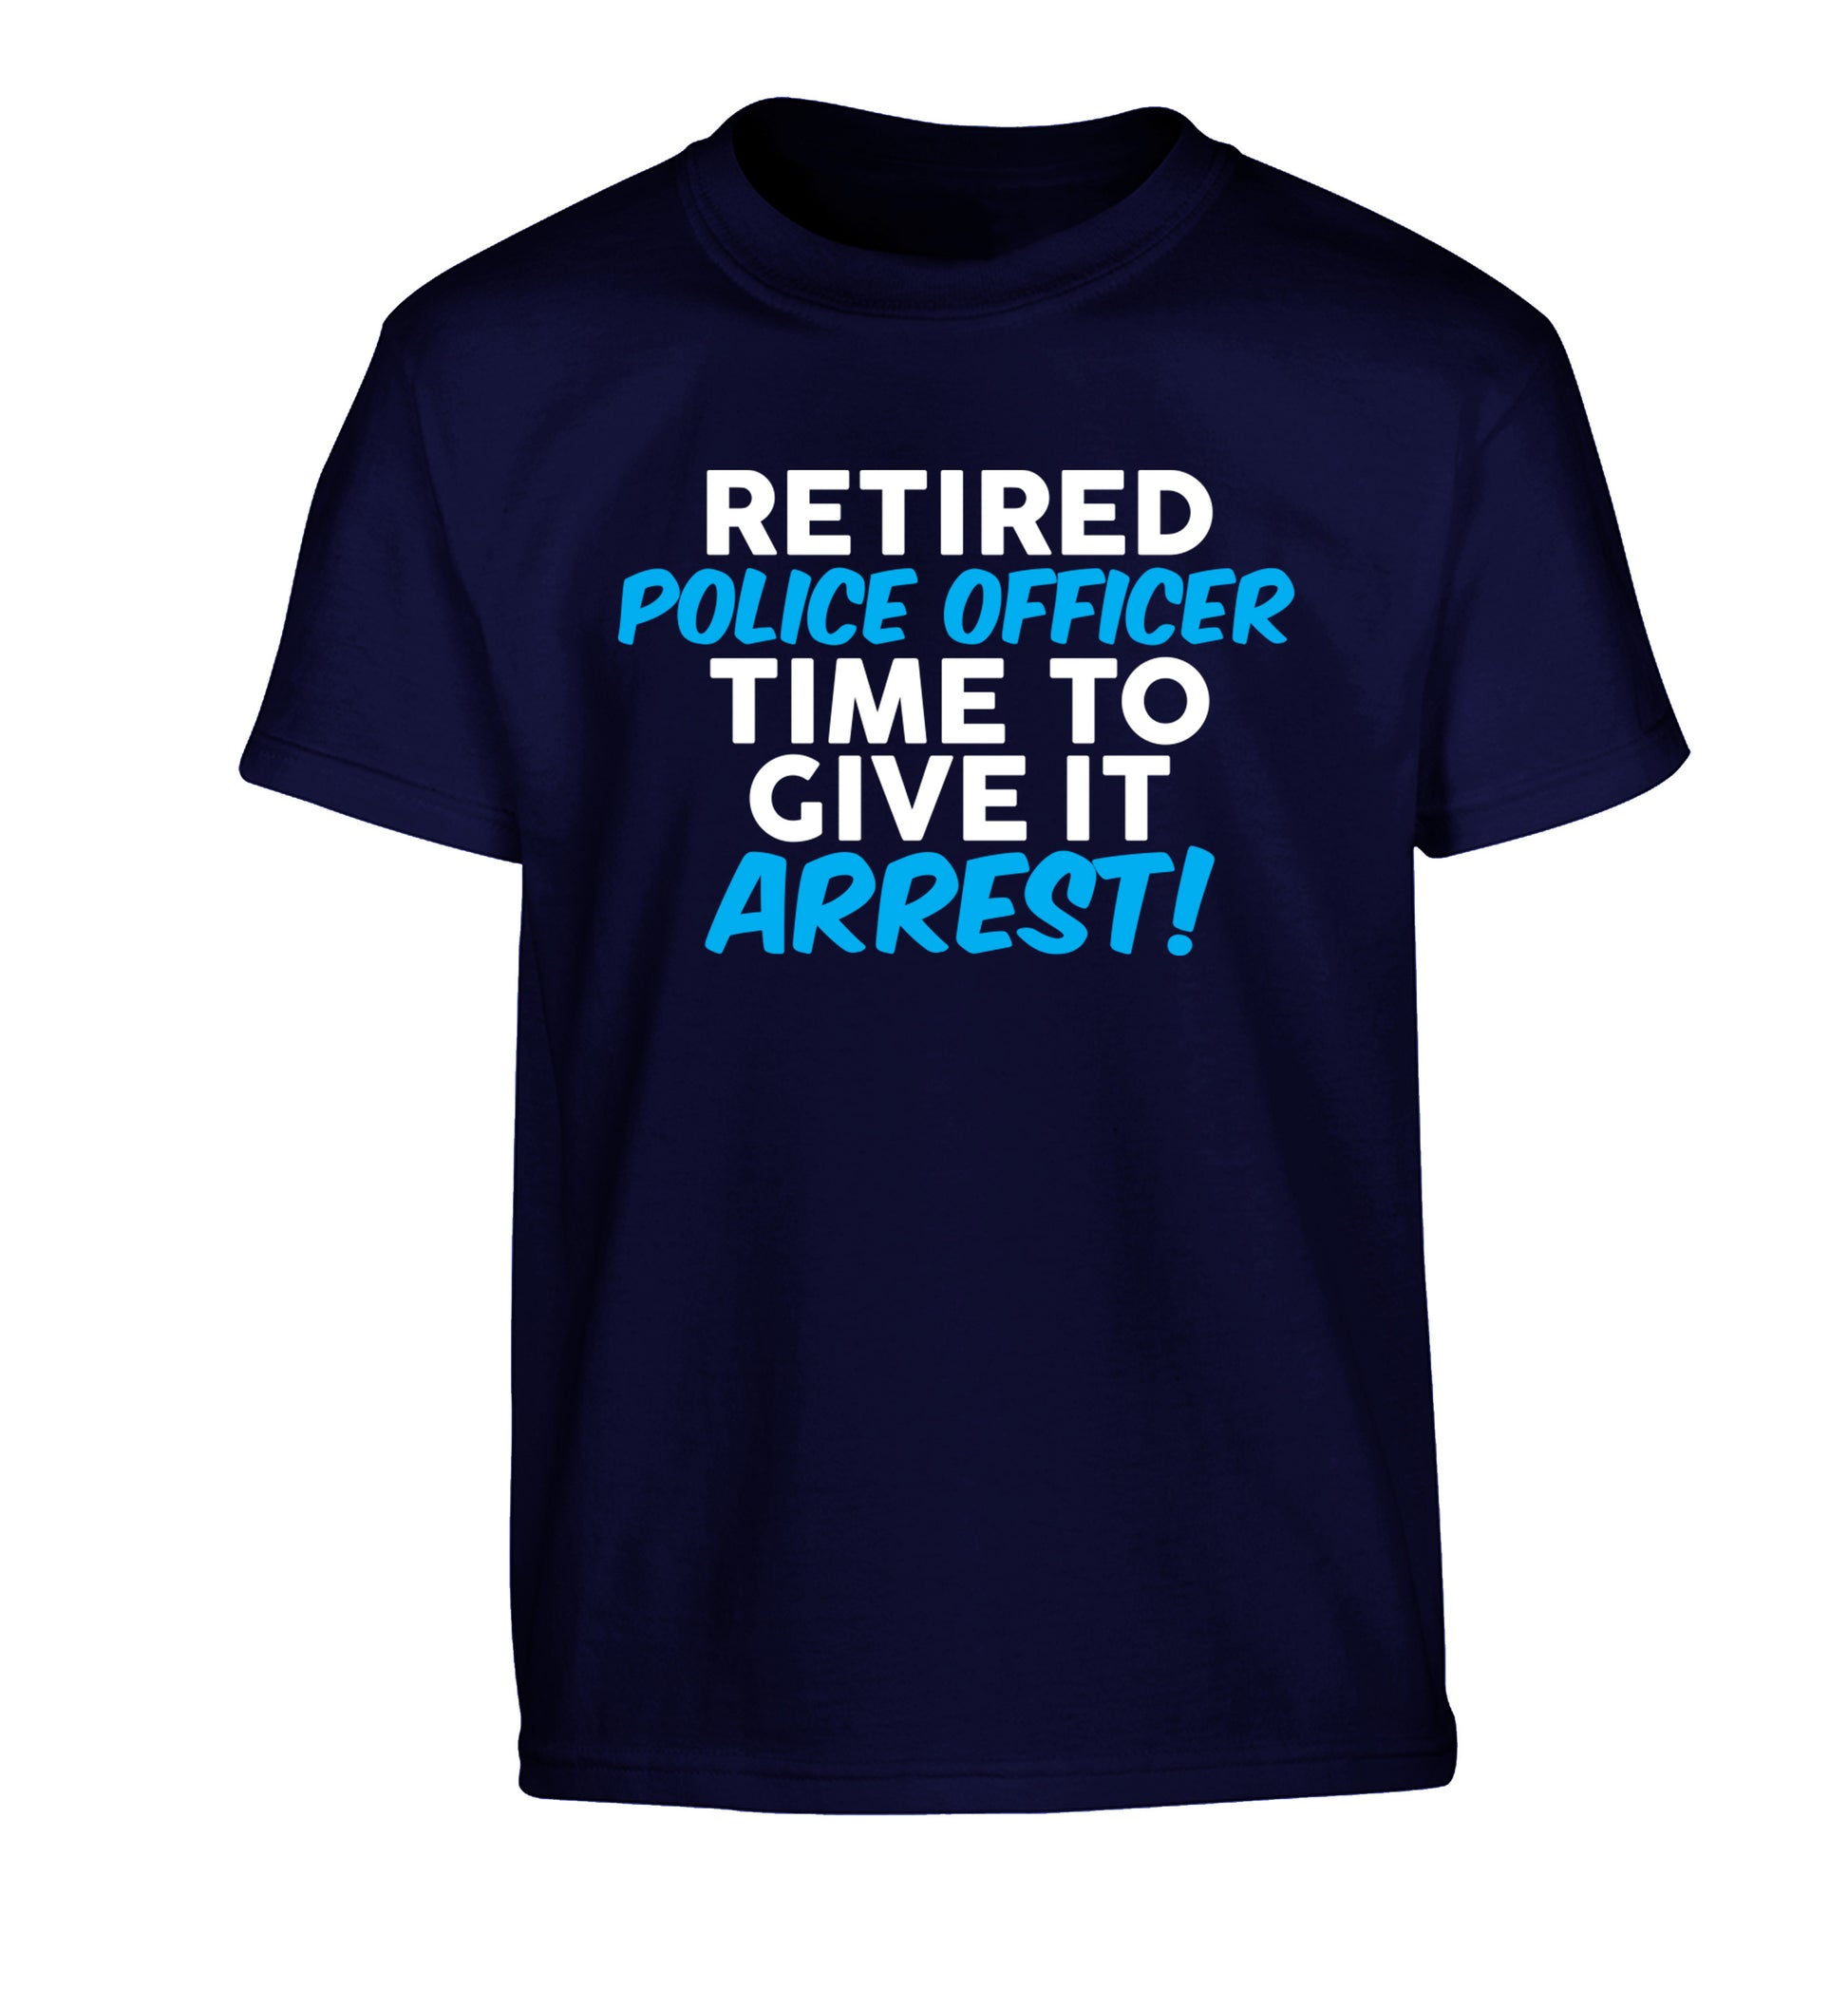 Retired police officer time to give it arrest Children's navy Tshirt 12-13 Years